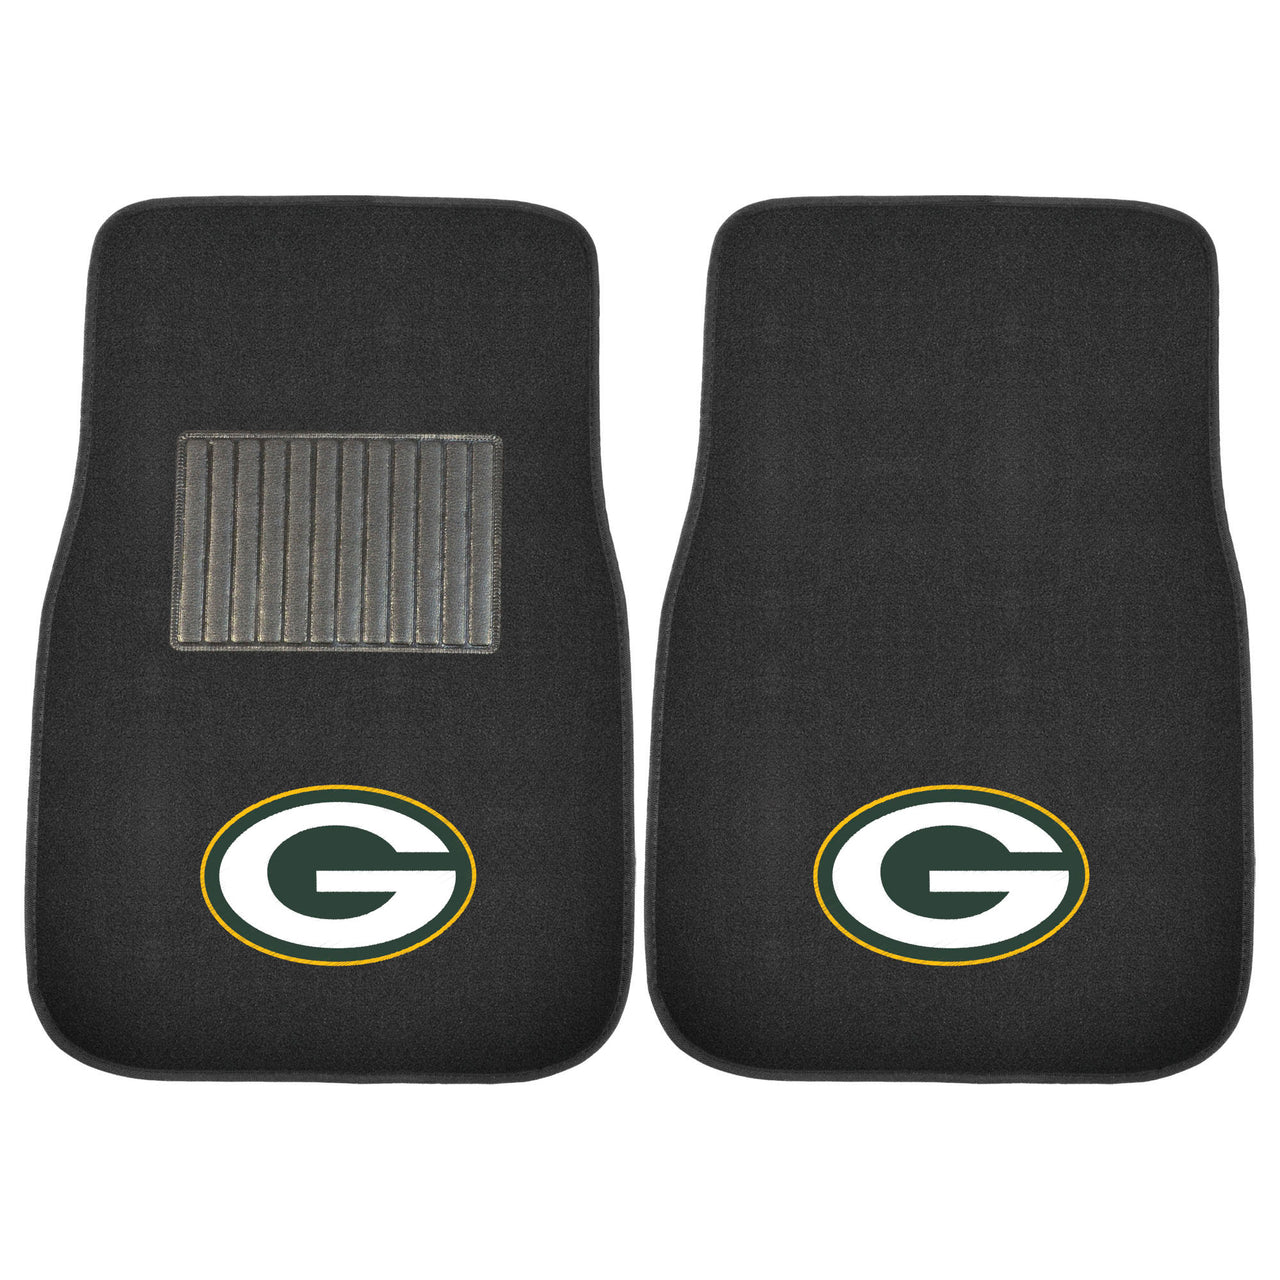 Green Bay Packers 2 Piece Embroidered Car Mat Set - Dynasty Sports & Framing 